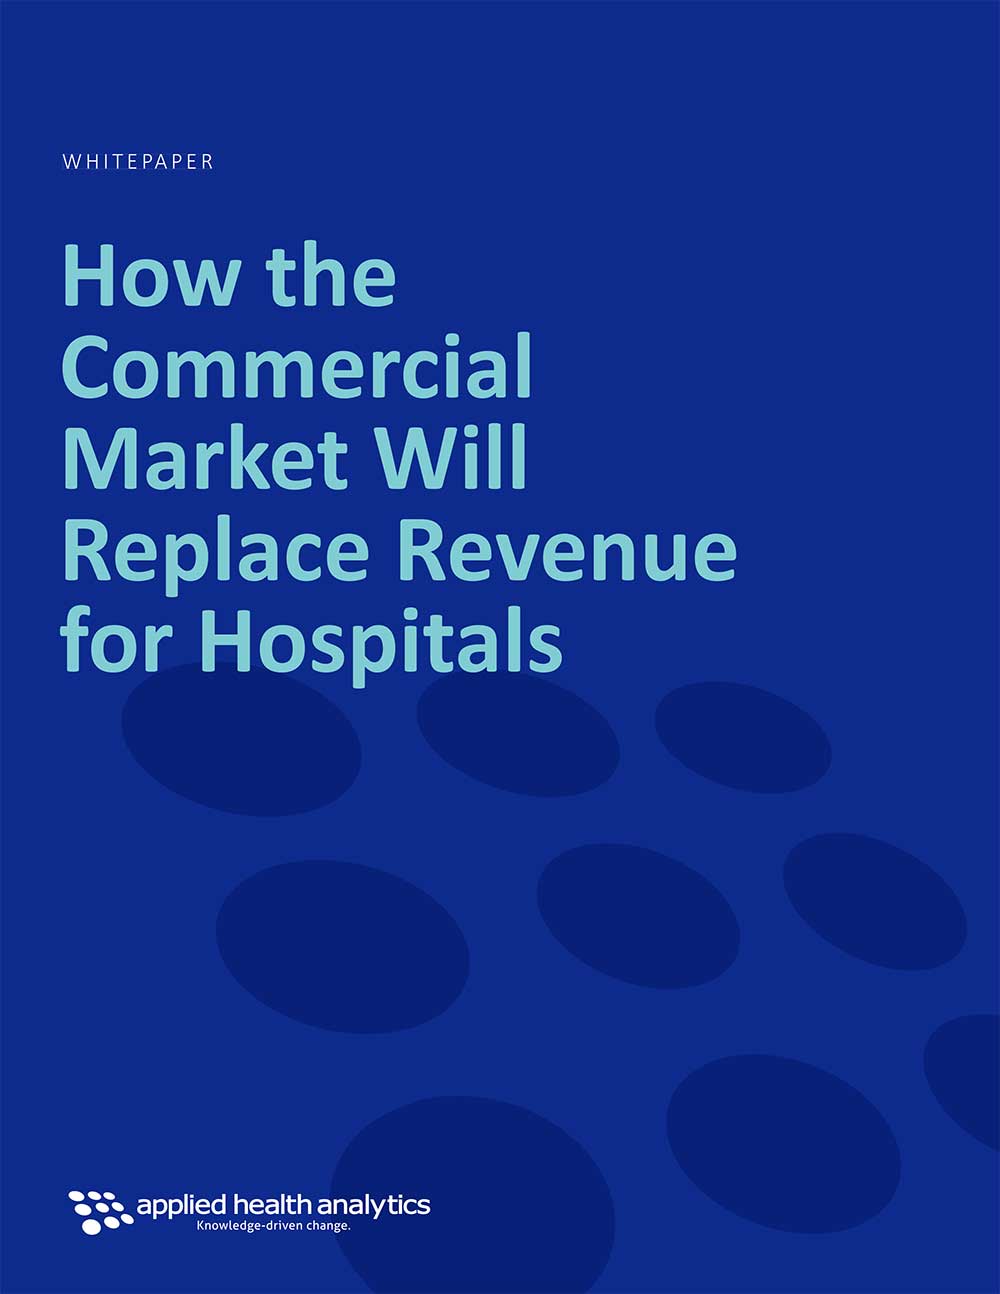 Applied Health Analytics Whitepaper How the Commercial Market Will Replace Revenue for Hospitals